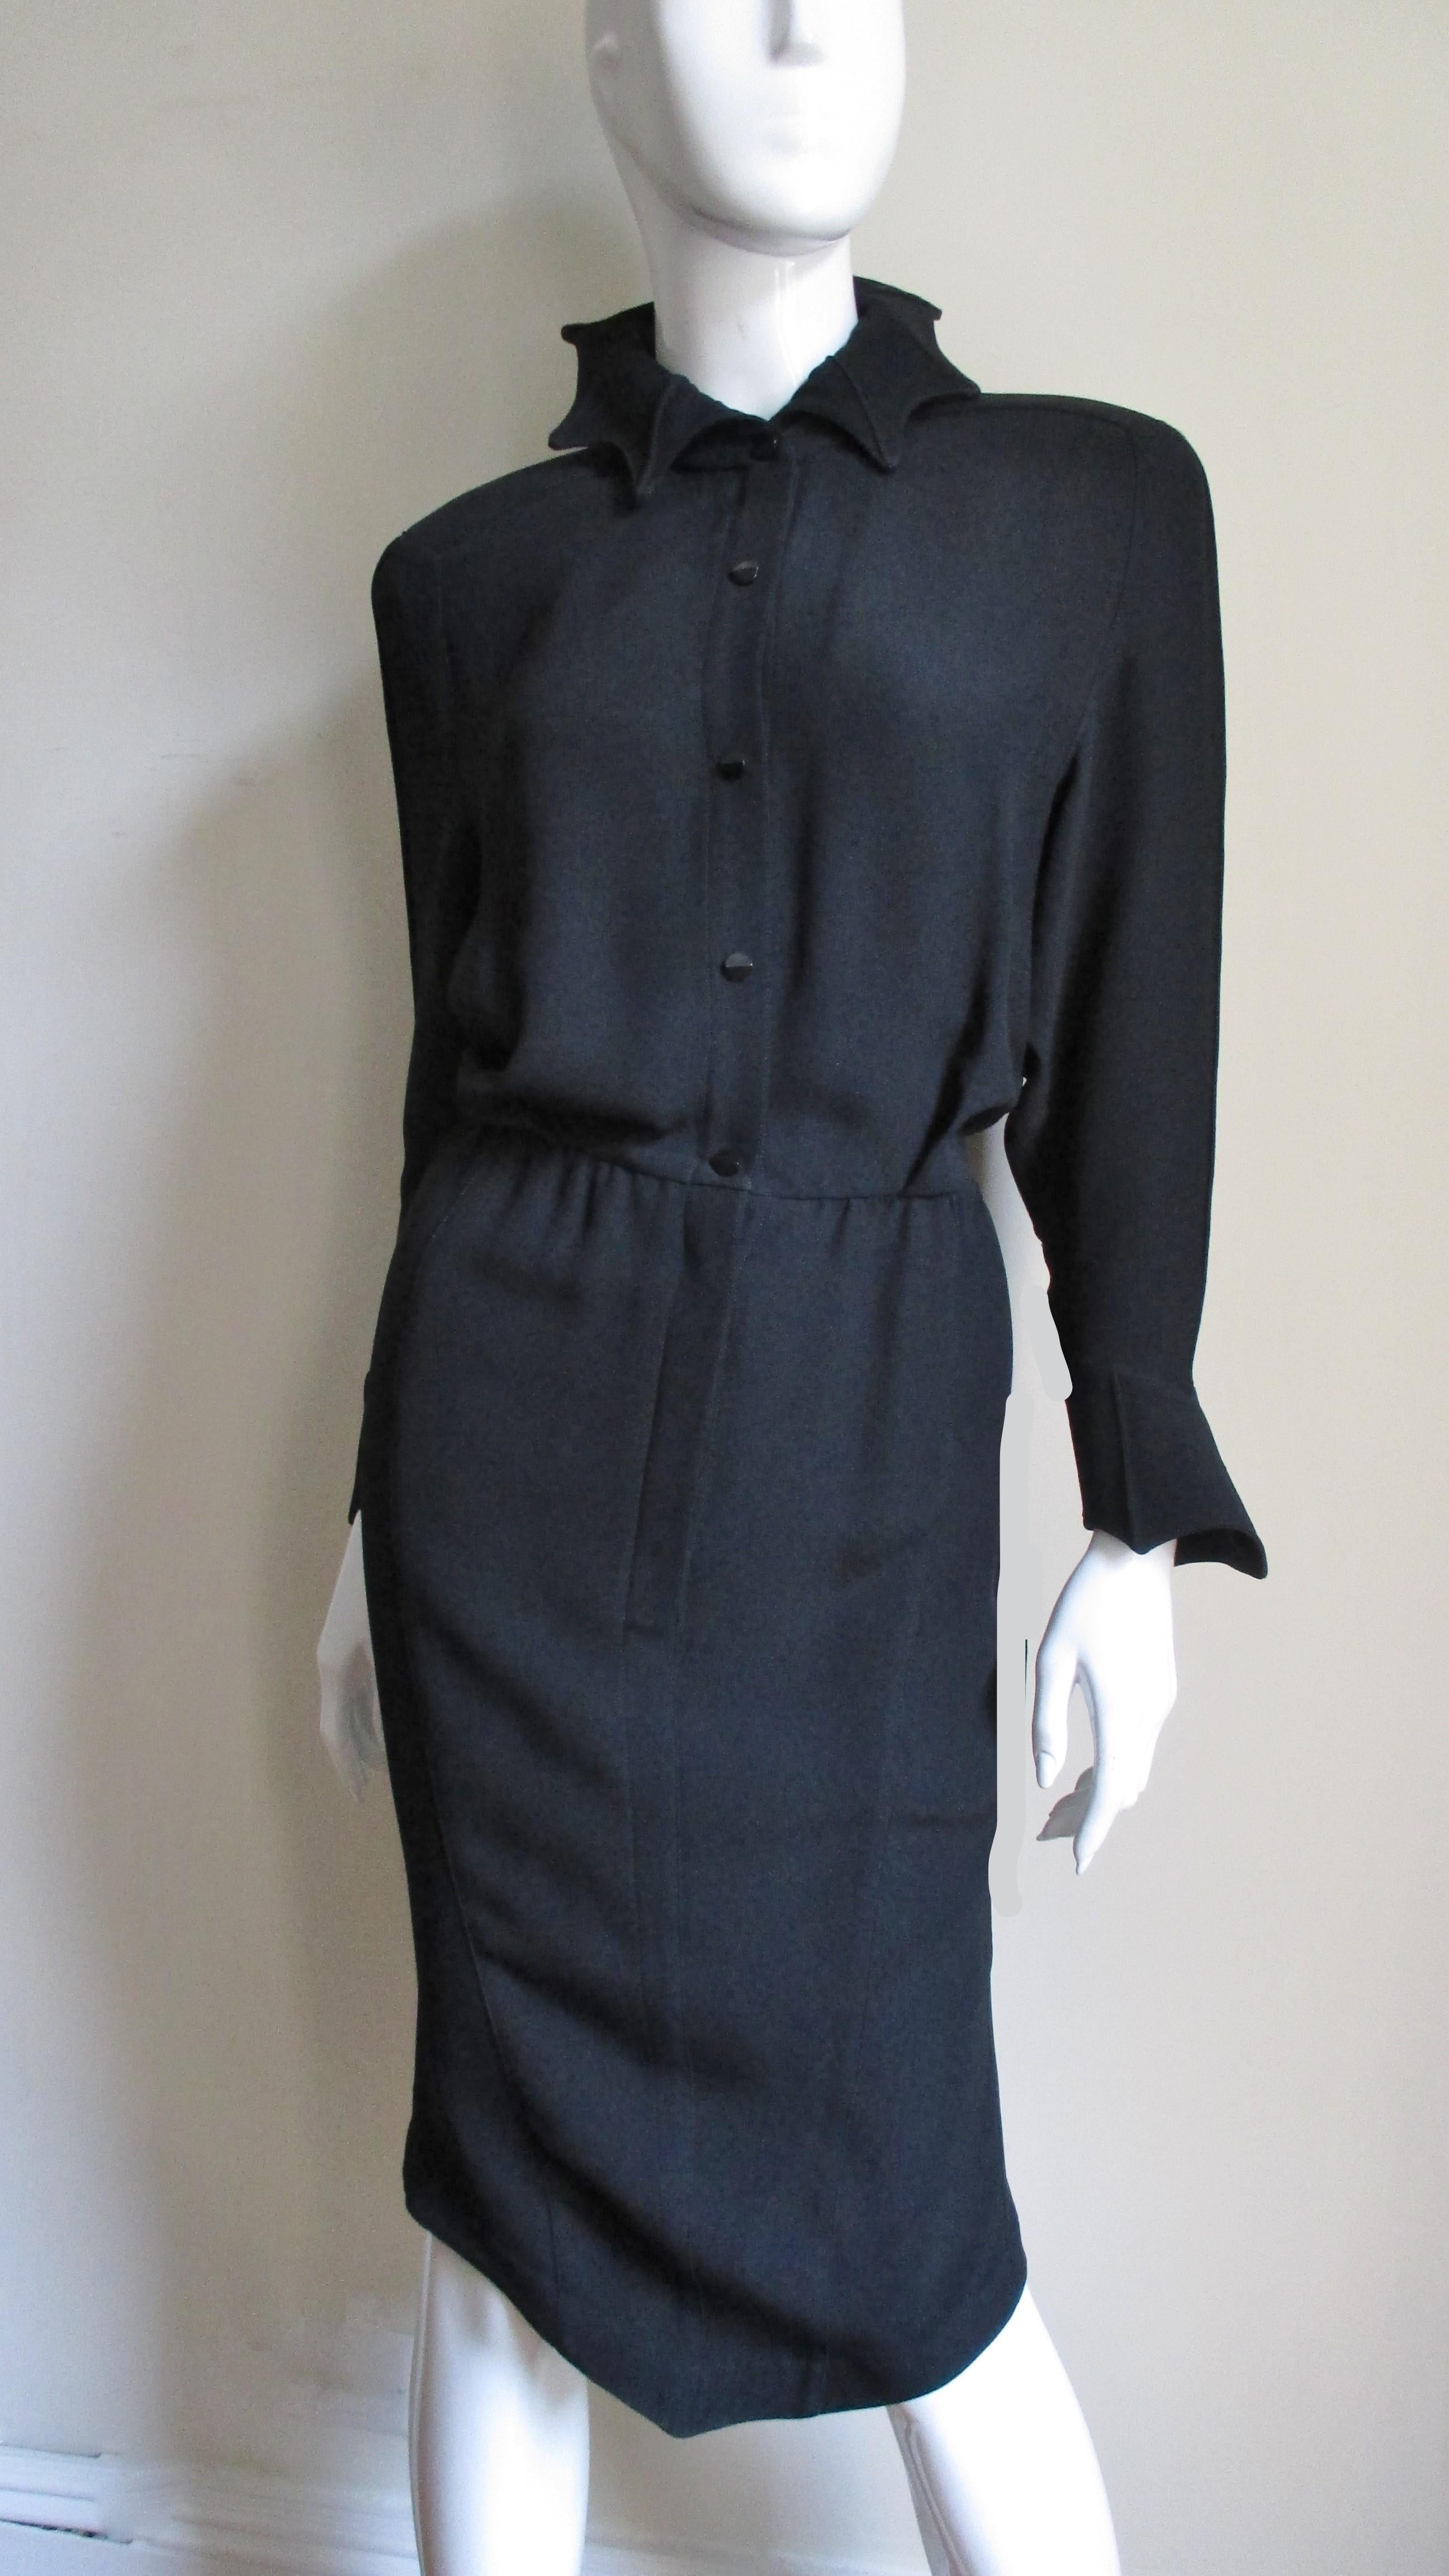 A sort of modern Gothic twist on the wiggle dress from master designer Thierry Mugler in a rich black synthetic blend.  It has long cuffed sleeves, a stand up collar (can be worn up or down) and a blouson bodice with 3 tucks at the waist.  The cuffs